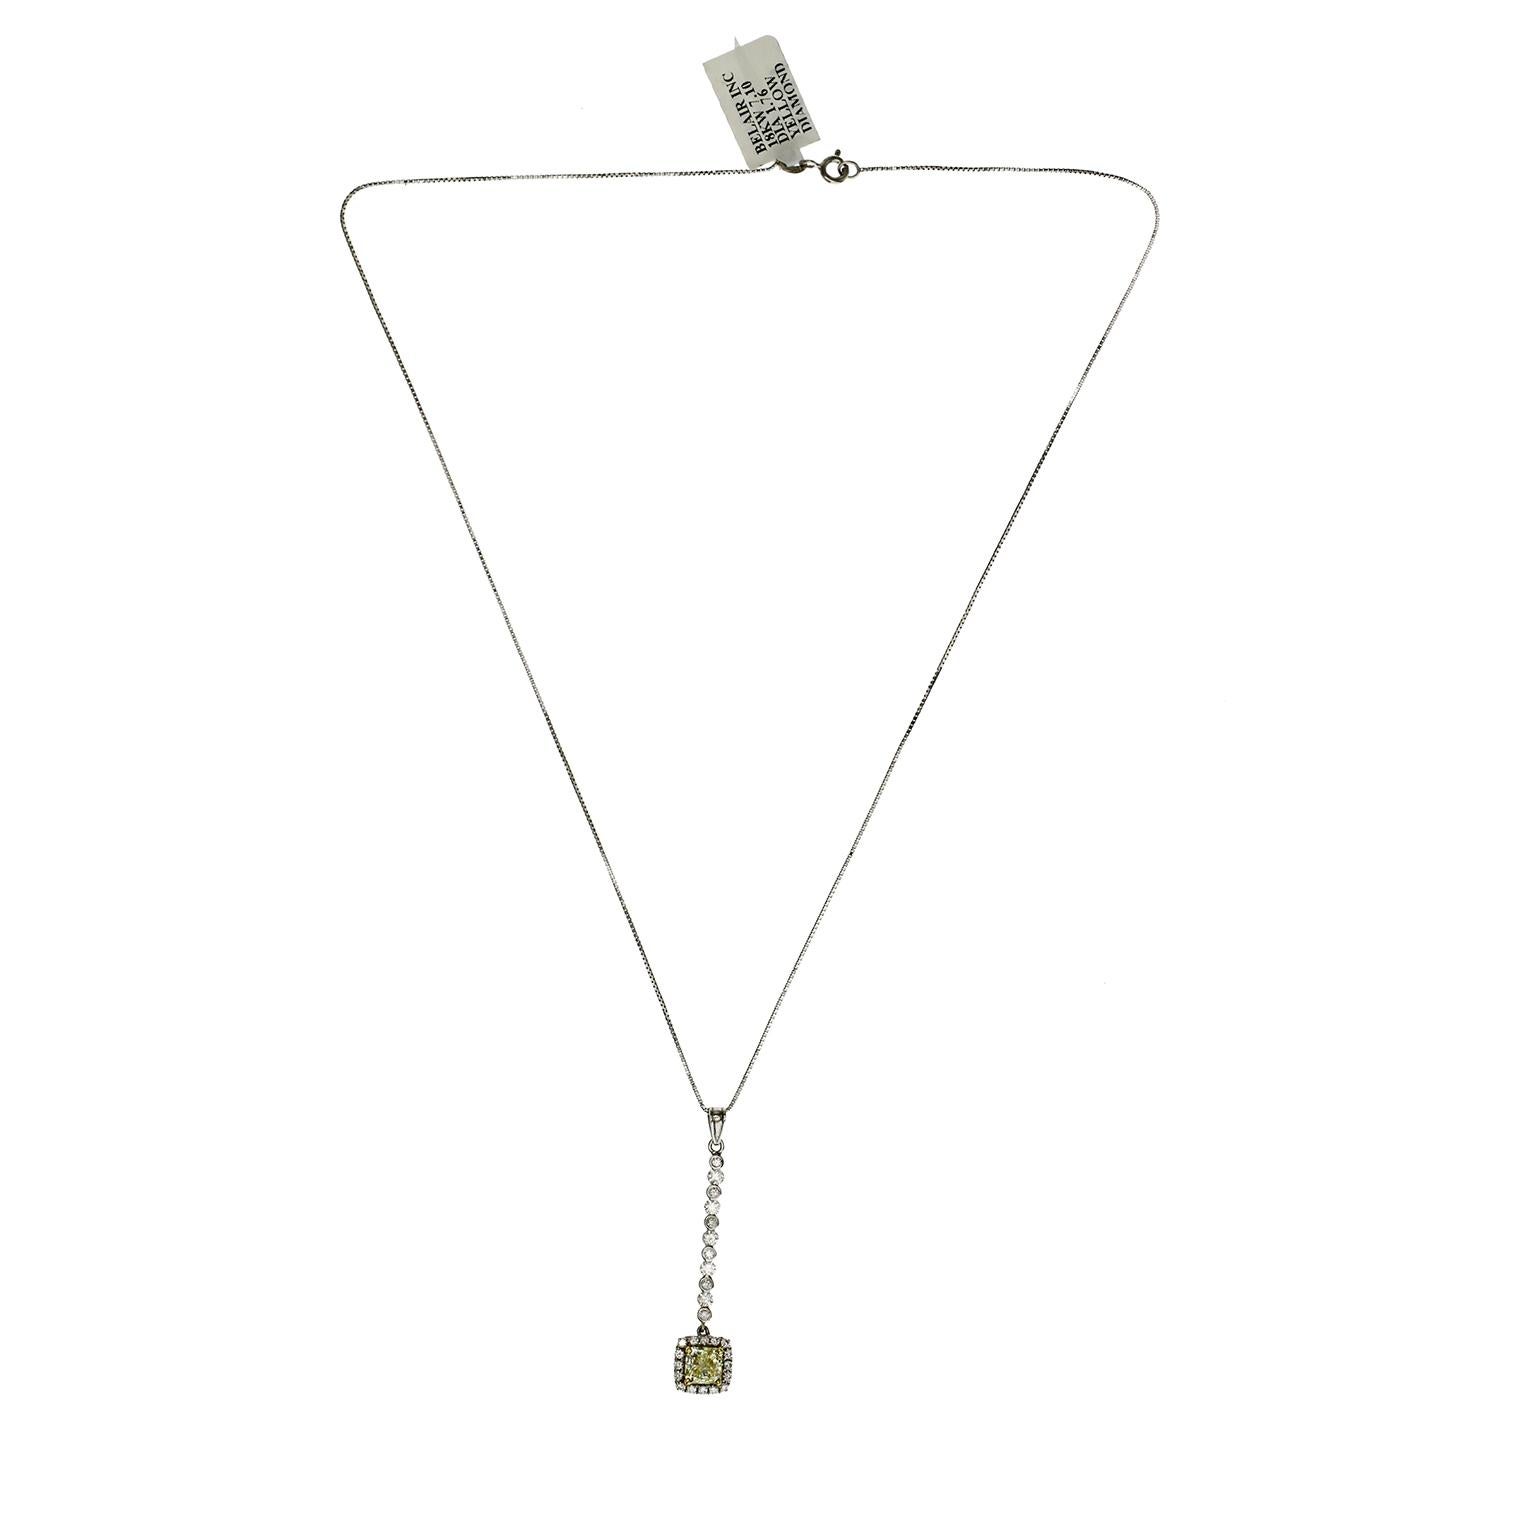 100% Authentic, 100% Customer Satisfaction
Pendant: 43.5 mm
Chain: 0.8 mm
Size: 18 Inches
Metal: 18K White Gold
Hallmarks: 18K
Total Weight: 6 Grams
Stone Type: 1.79 CT Yellow and White Diamond 0.32 CT  G   SI1
Condition: New With Tag 